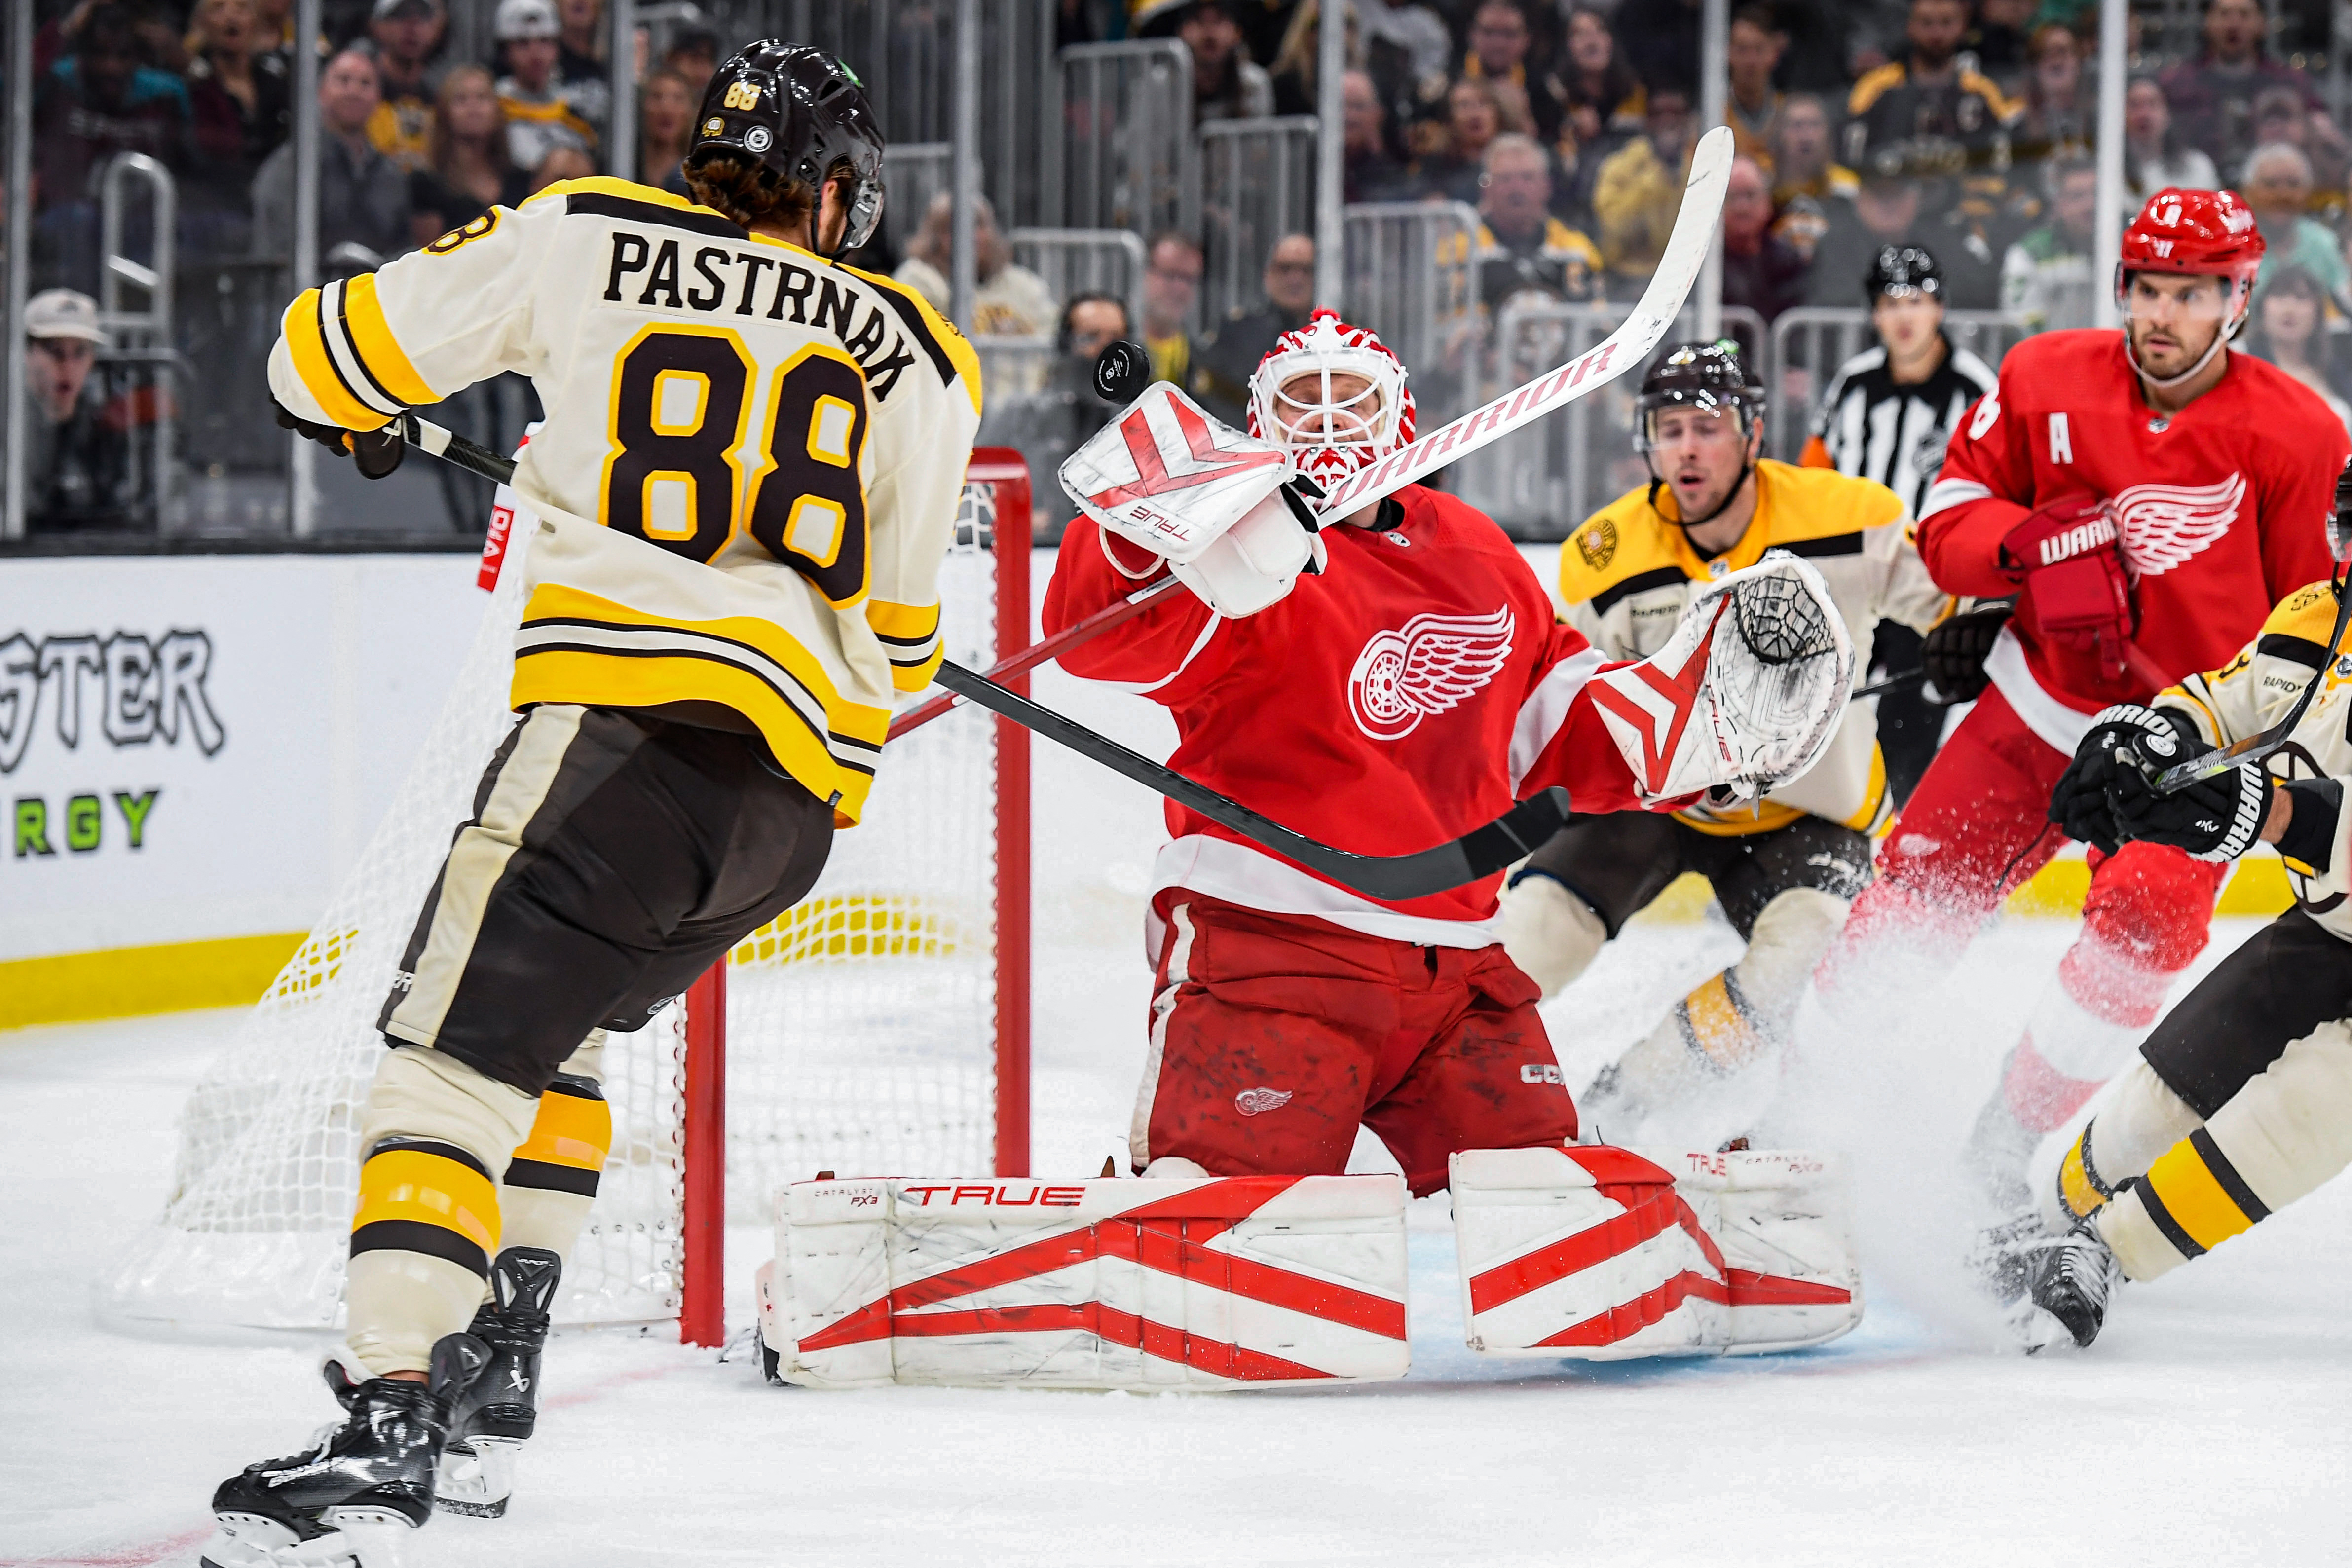 The NHL Scores A Game Winner with Big Data Analytics